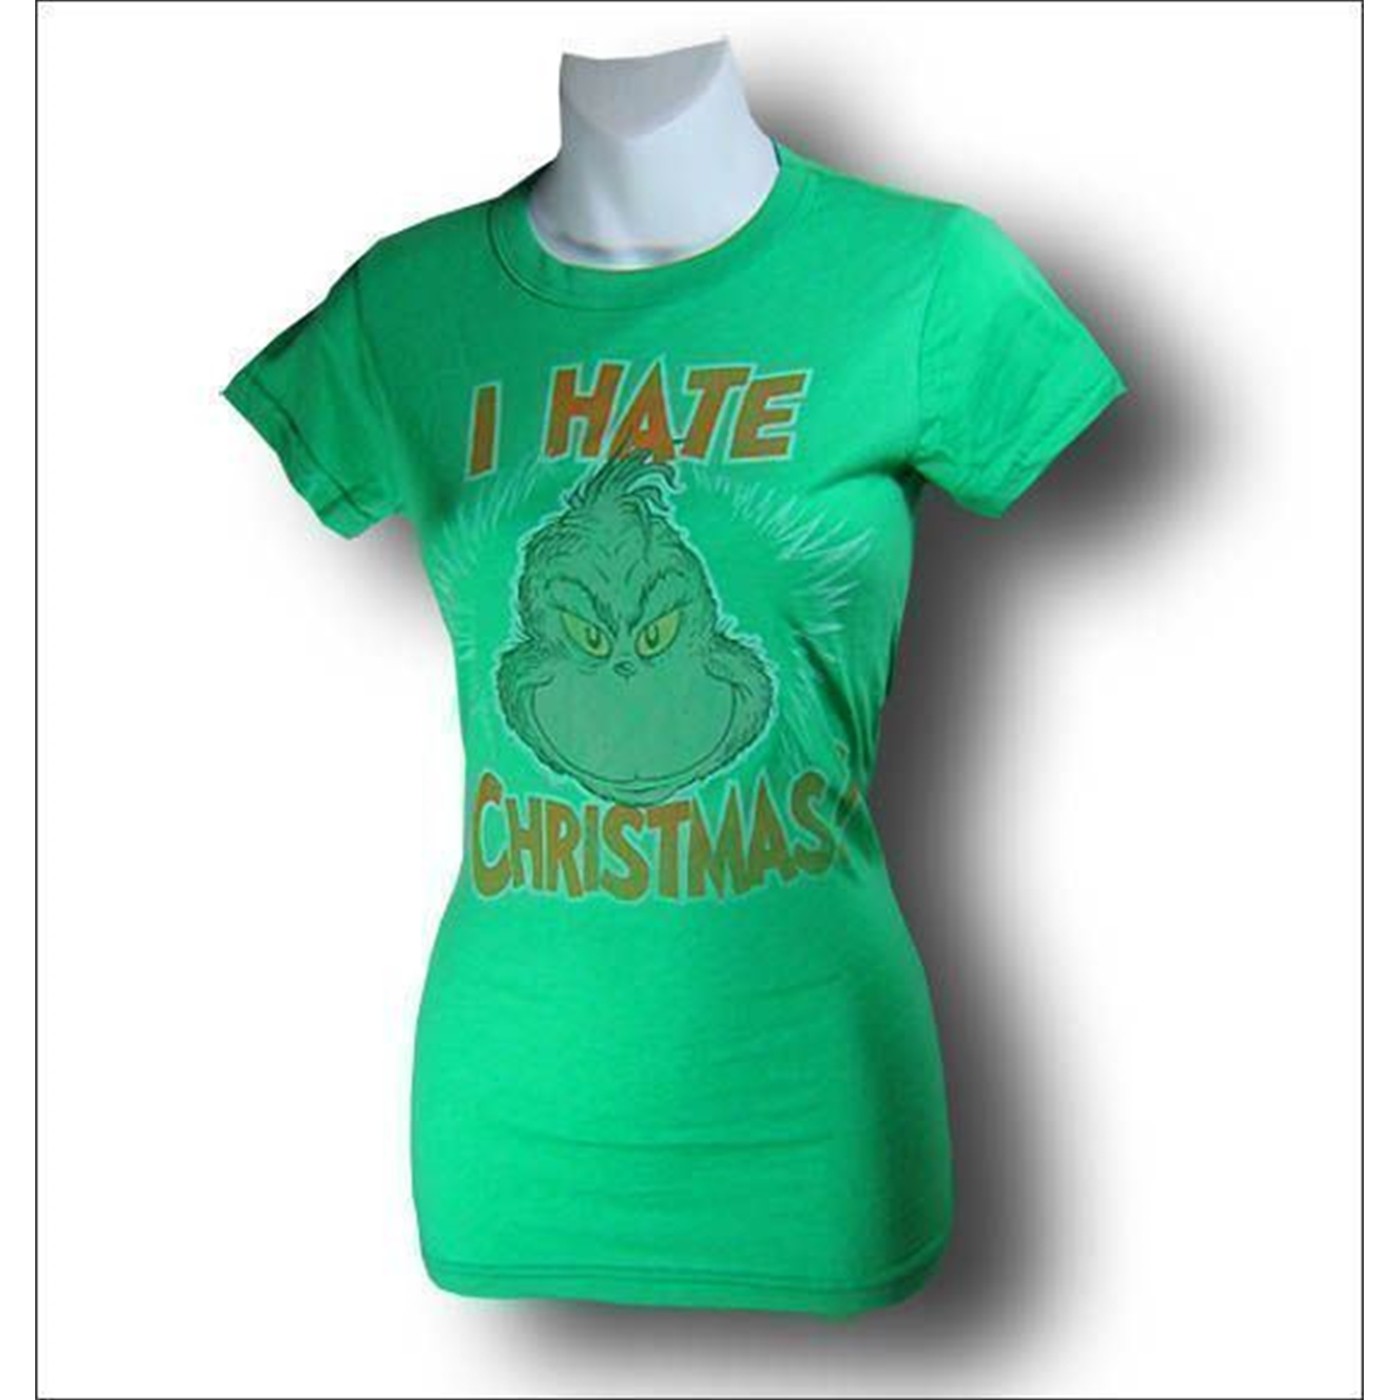 The Grinch Women's Tee by Junk Food